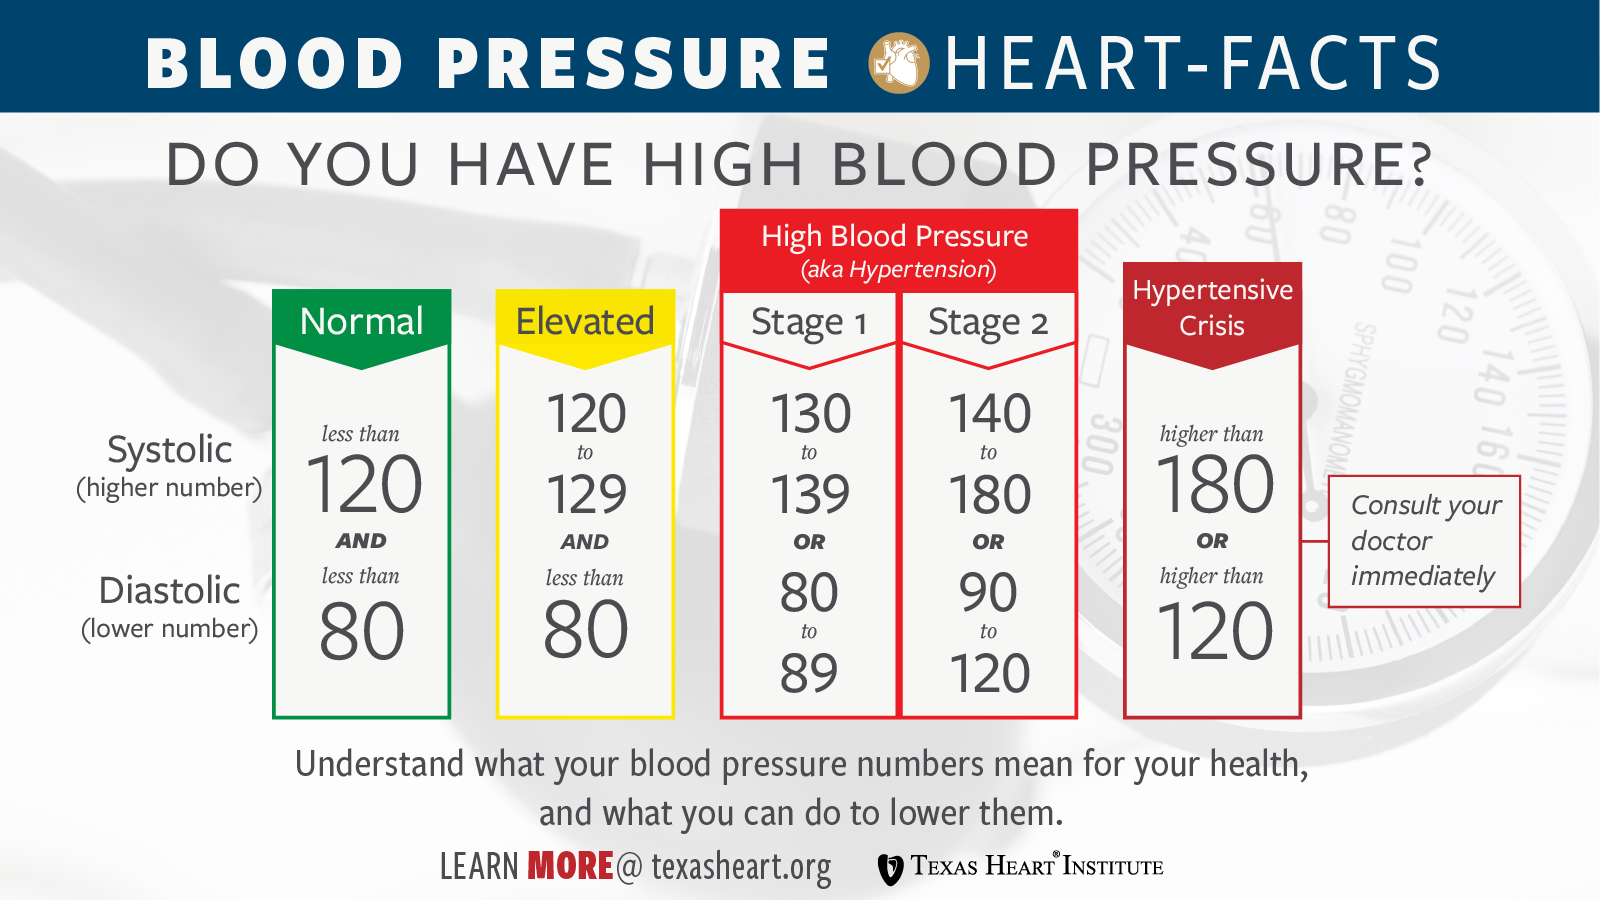 What Is Too Low Blood Pressure Chart